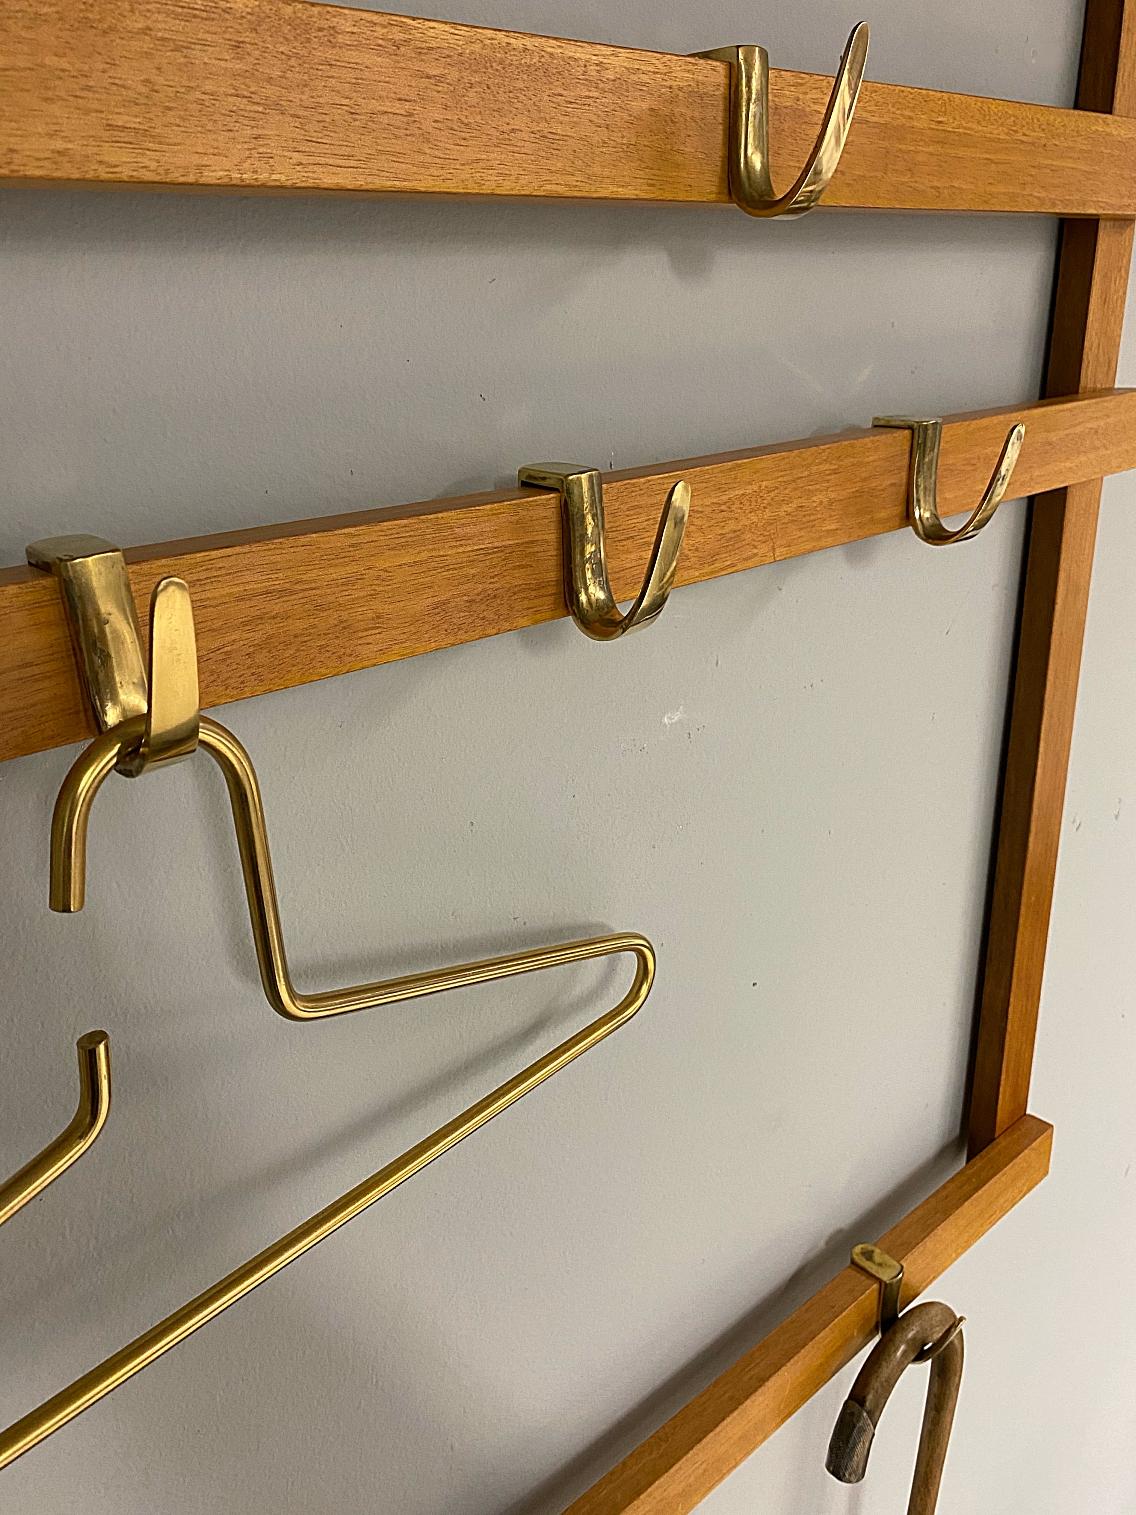 Polished Carl Auböck Midcentury Wall Coat Rack with Six Brass Hooks, 1950s, Austria For Sale